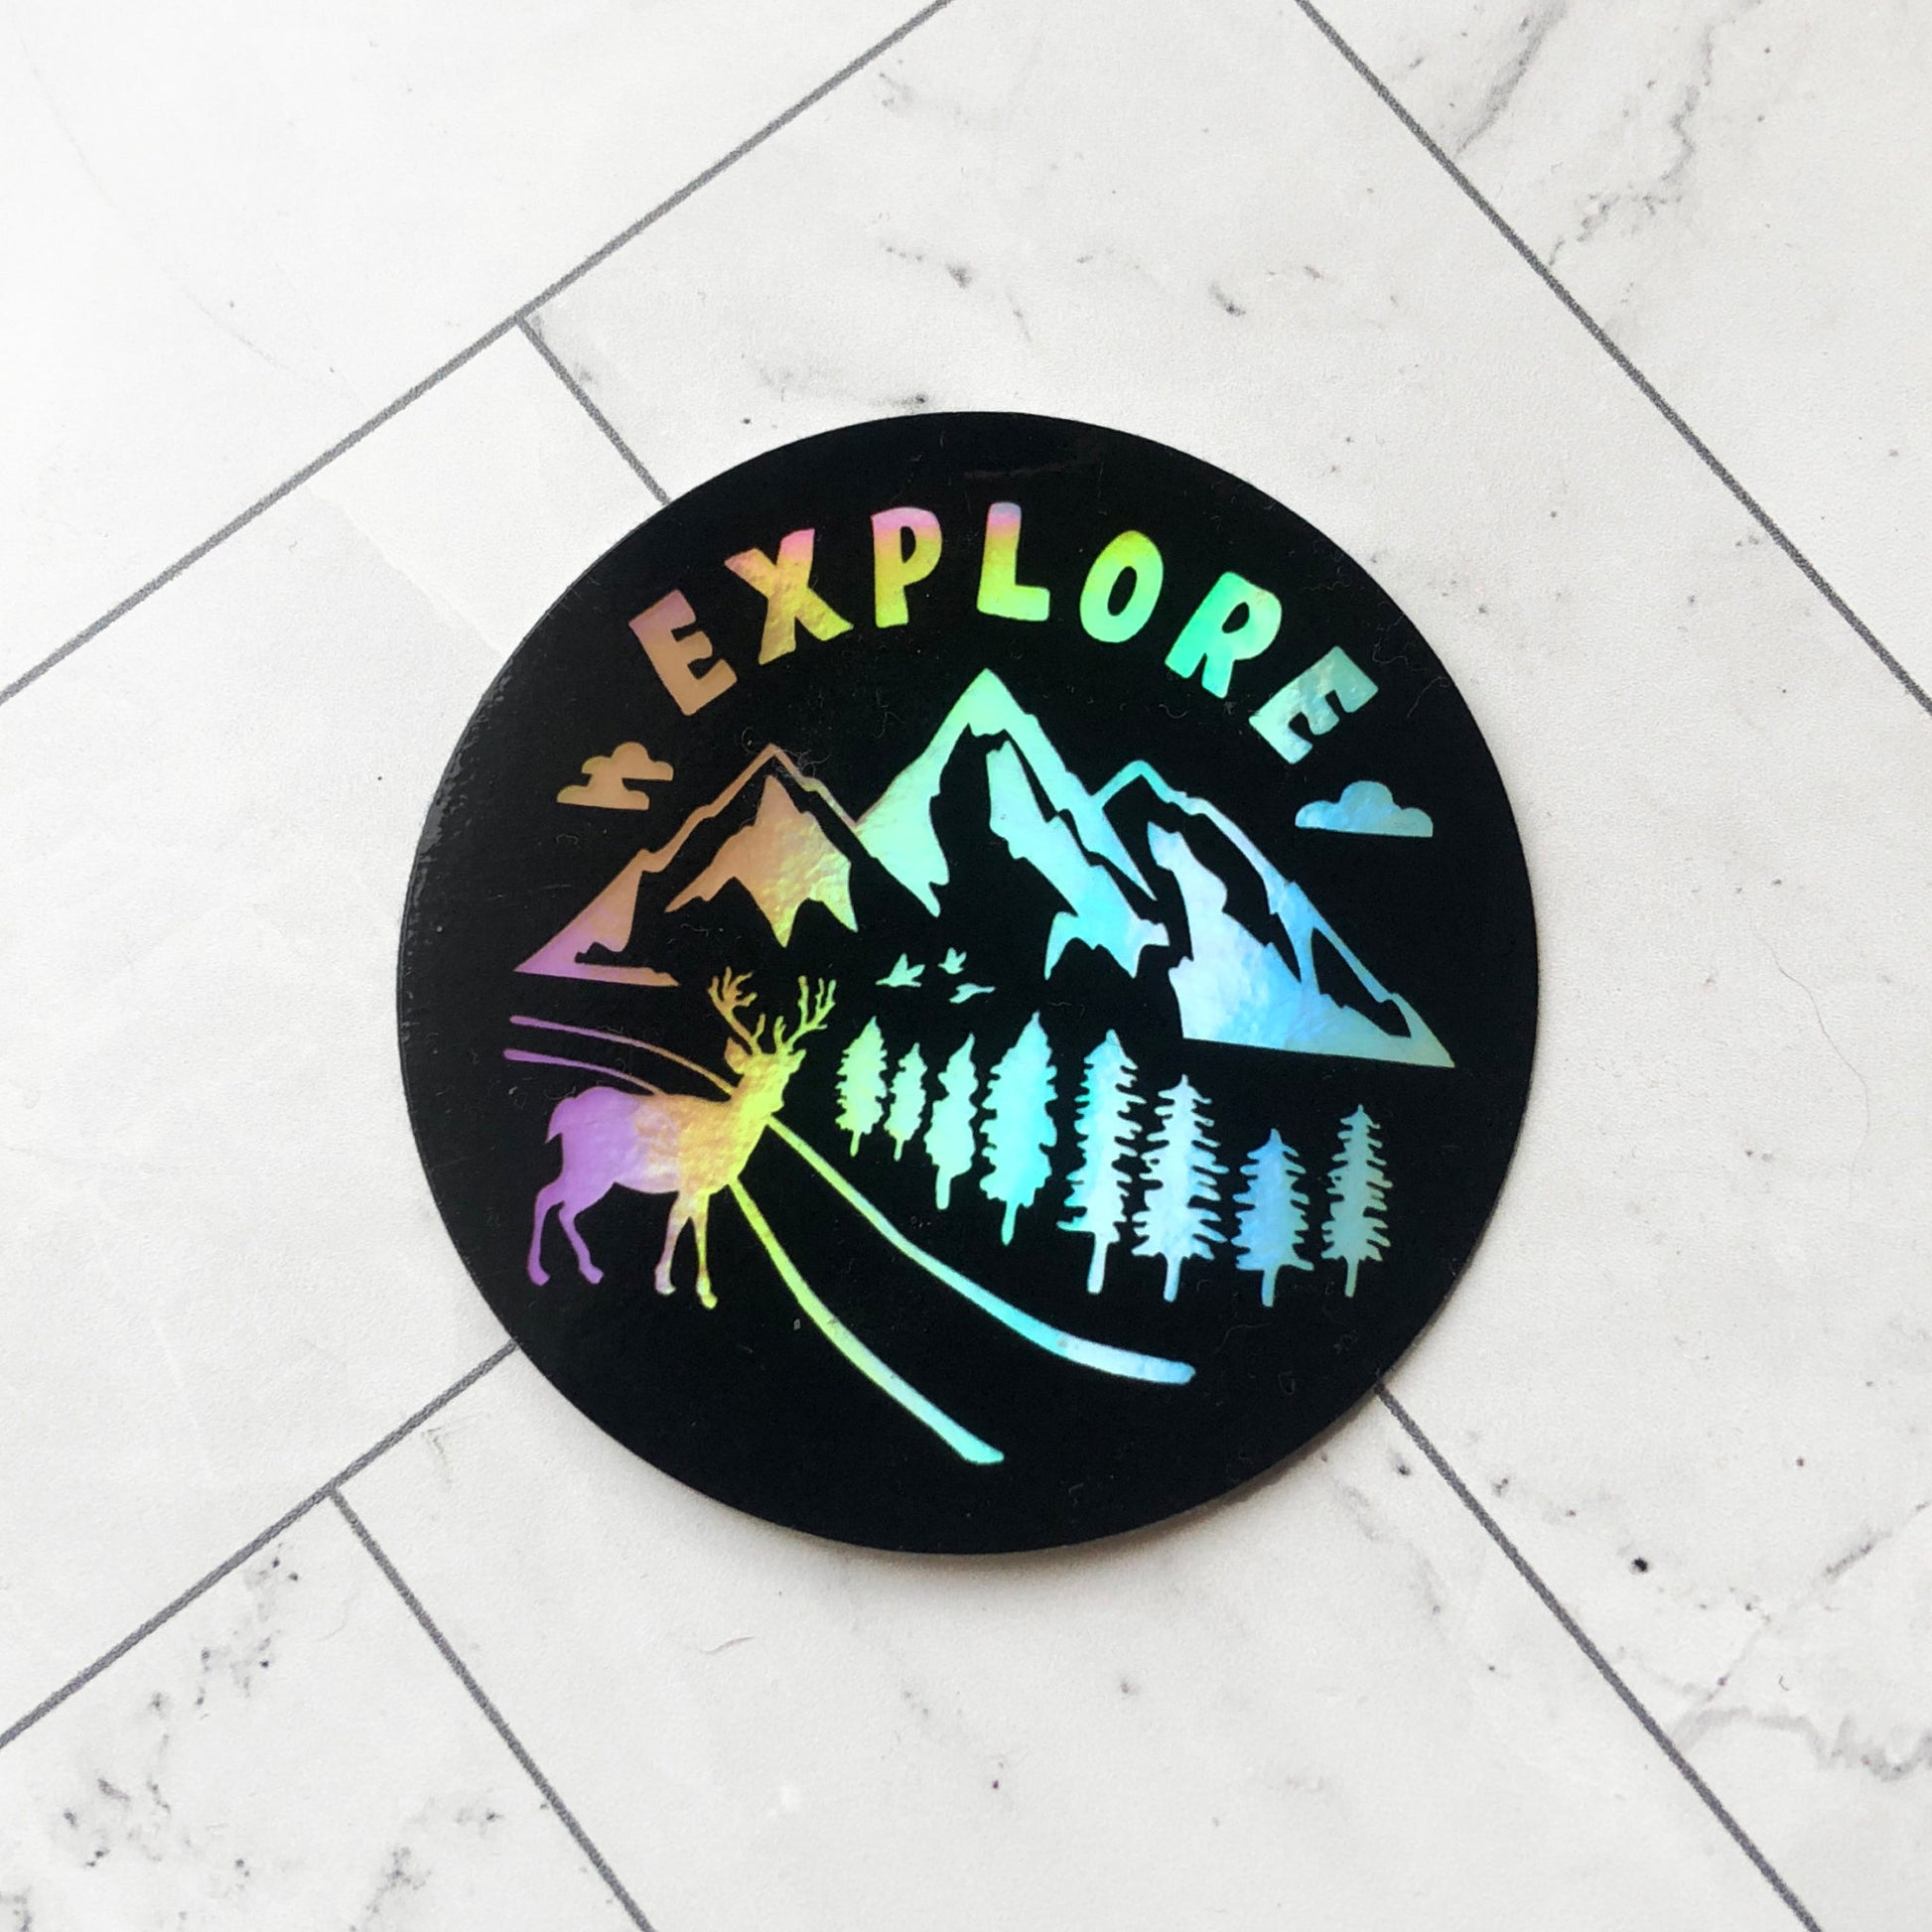 holographic sticker with word "explore" and nature designs of mountains, pine trees, and deer